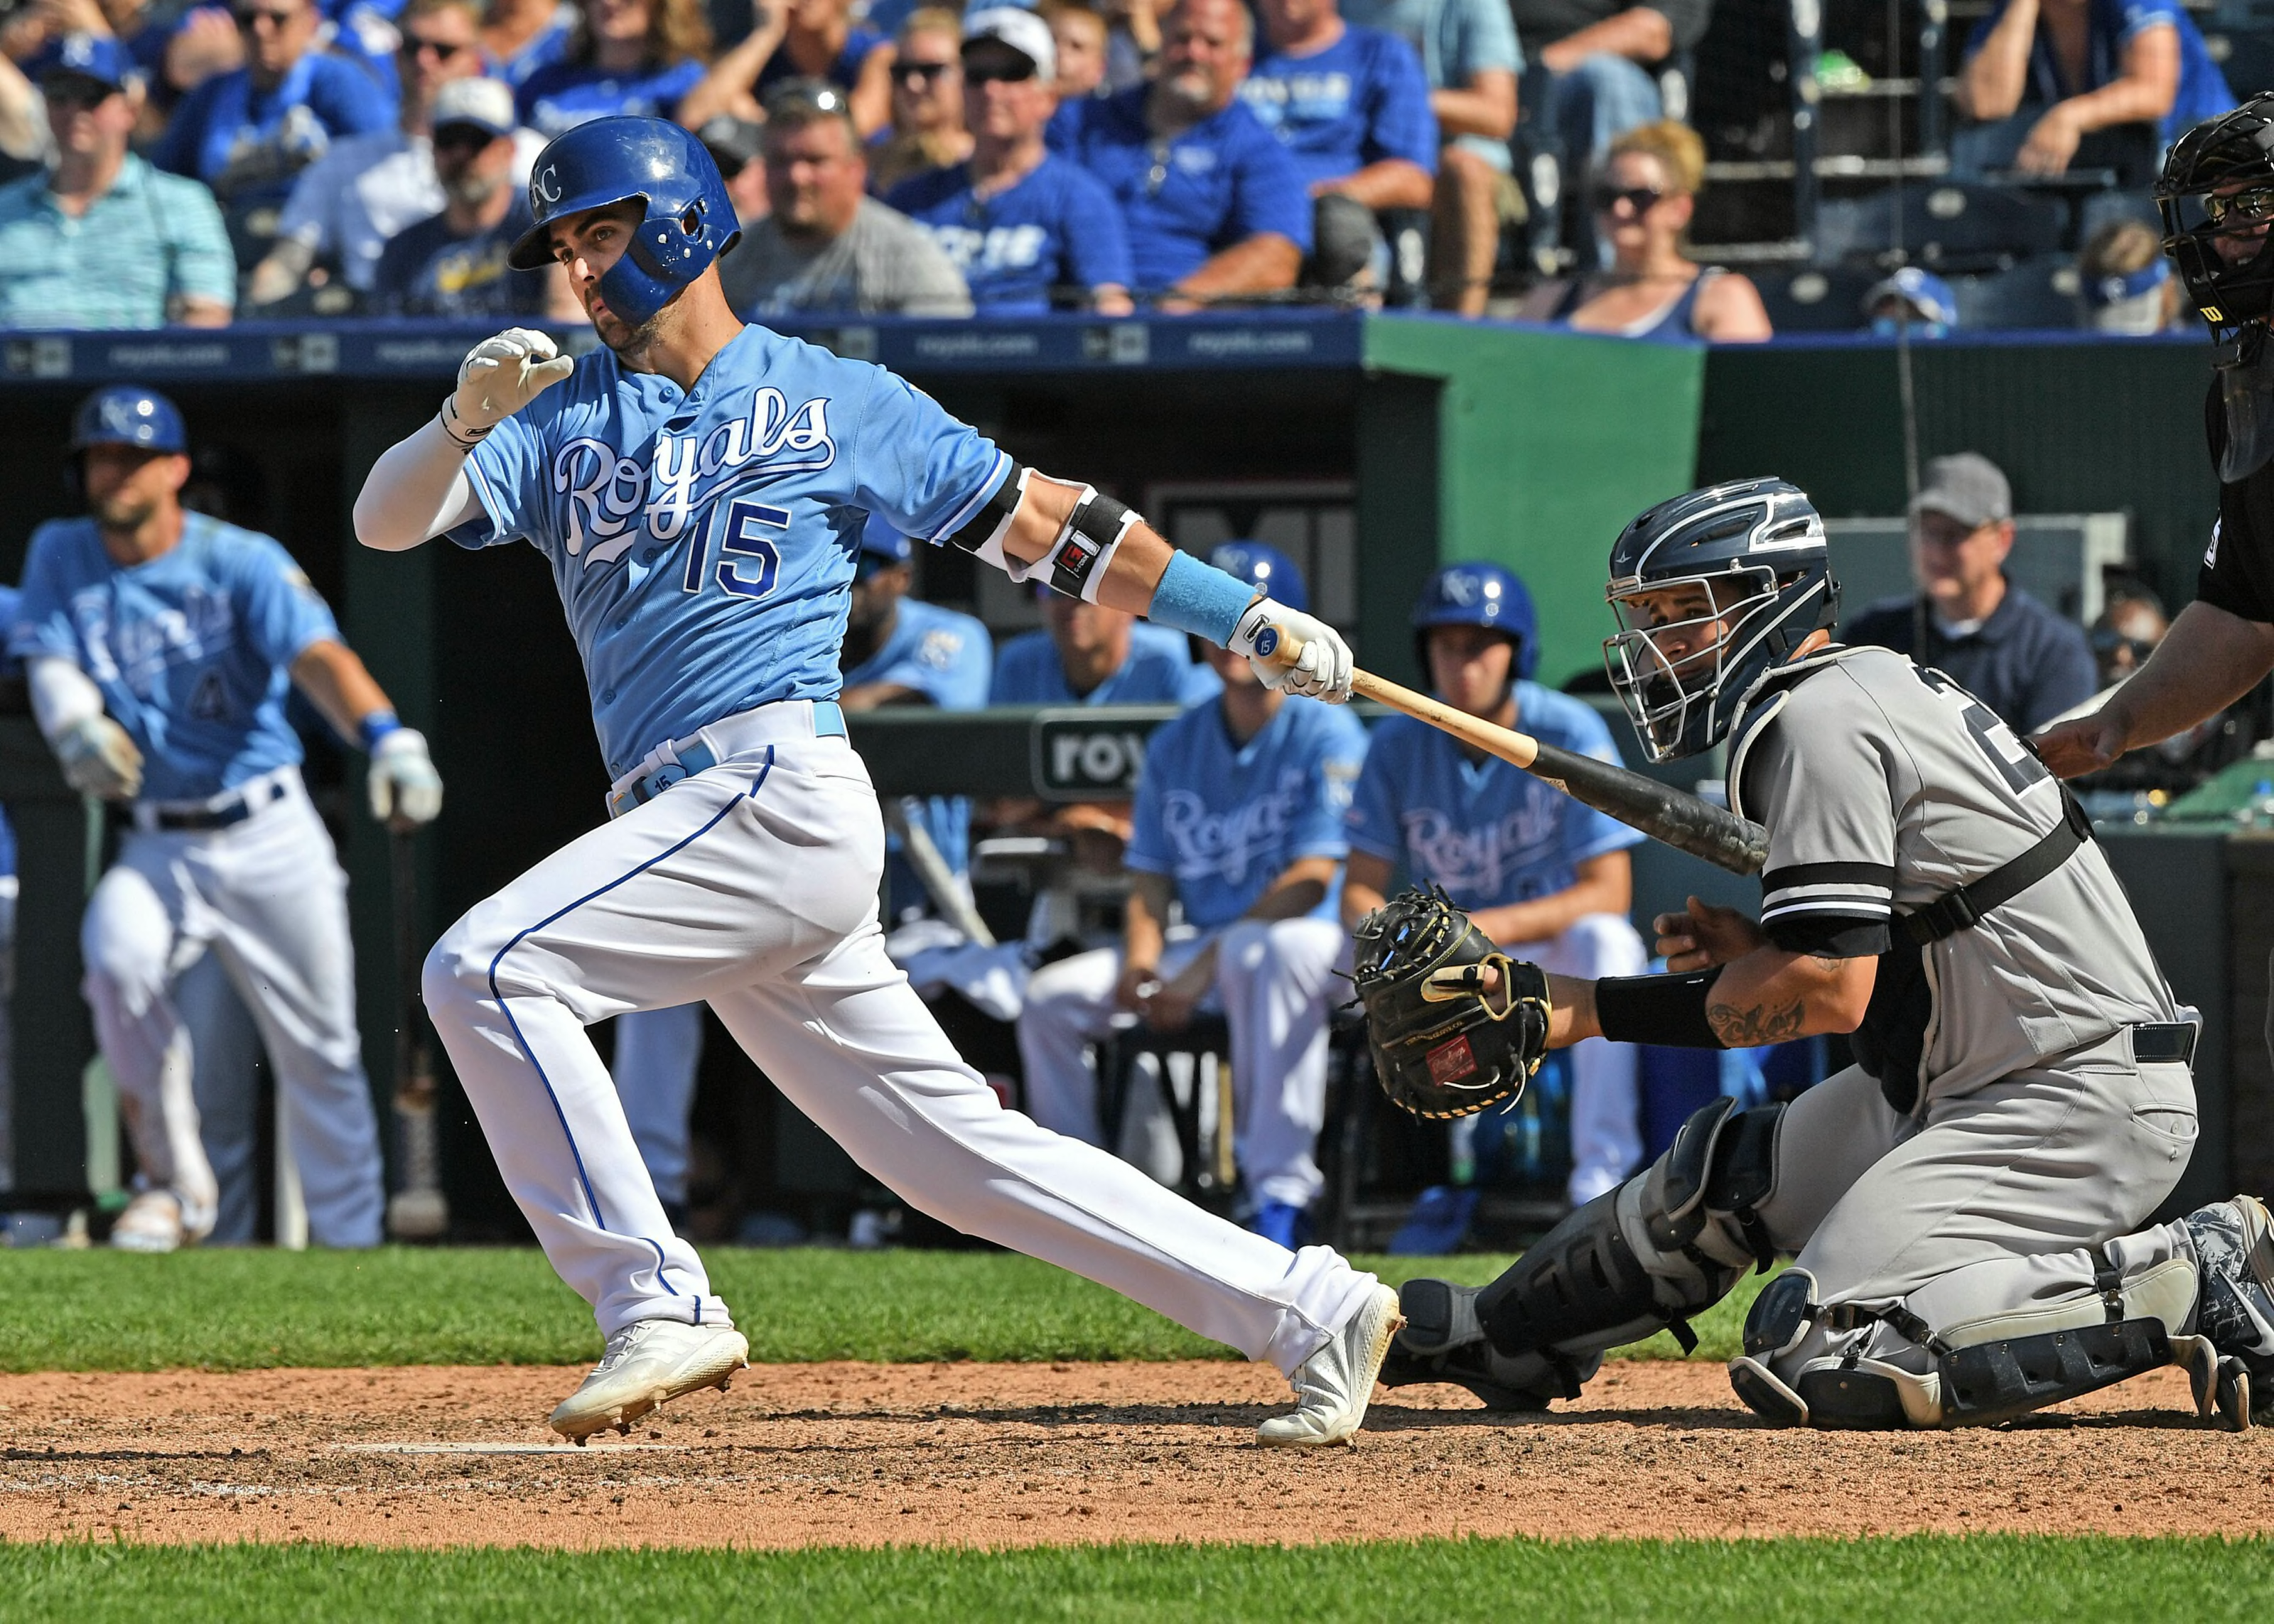 Kansas City Royals: 4 possible trade destinations for Whit Merrifield